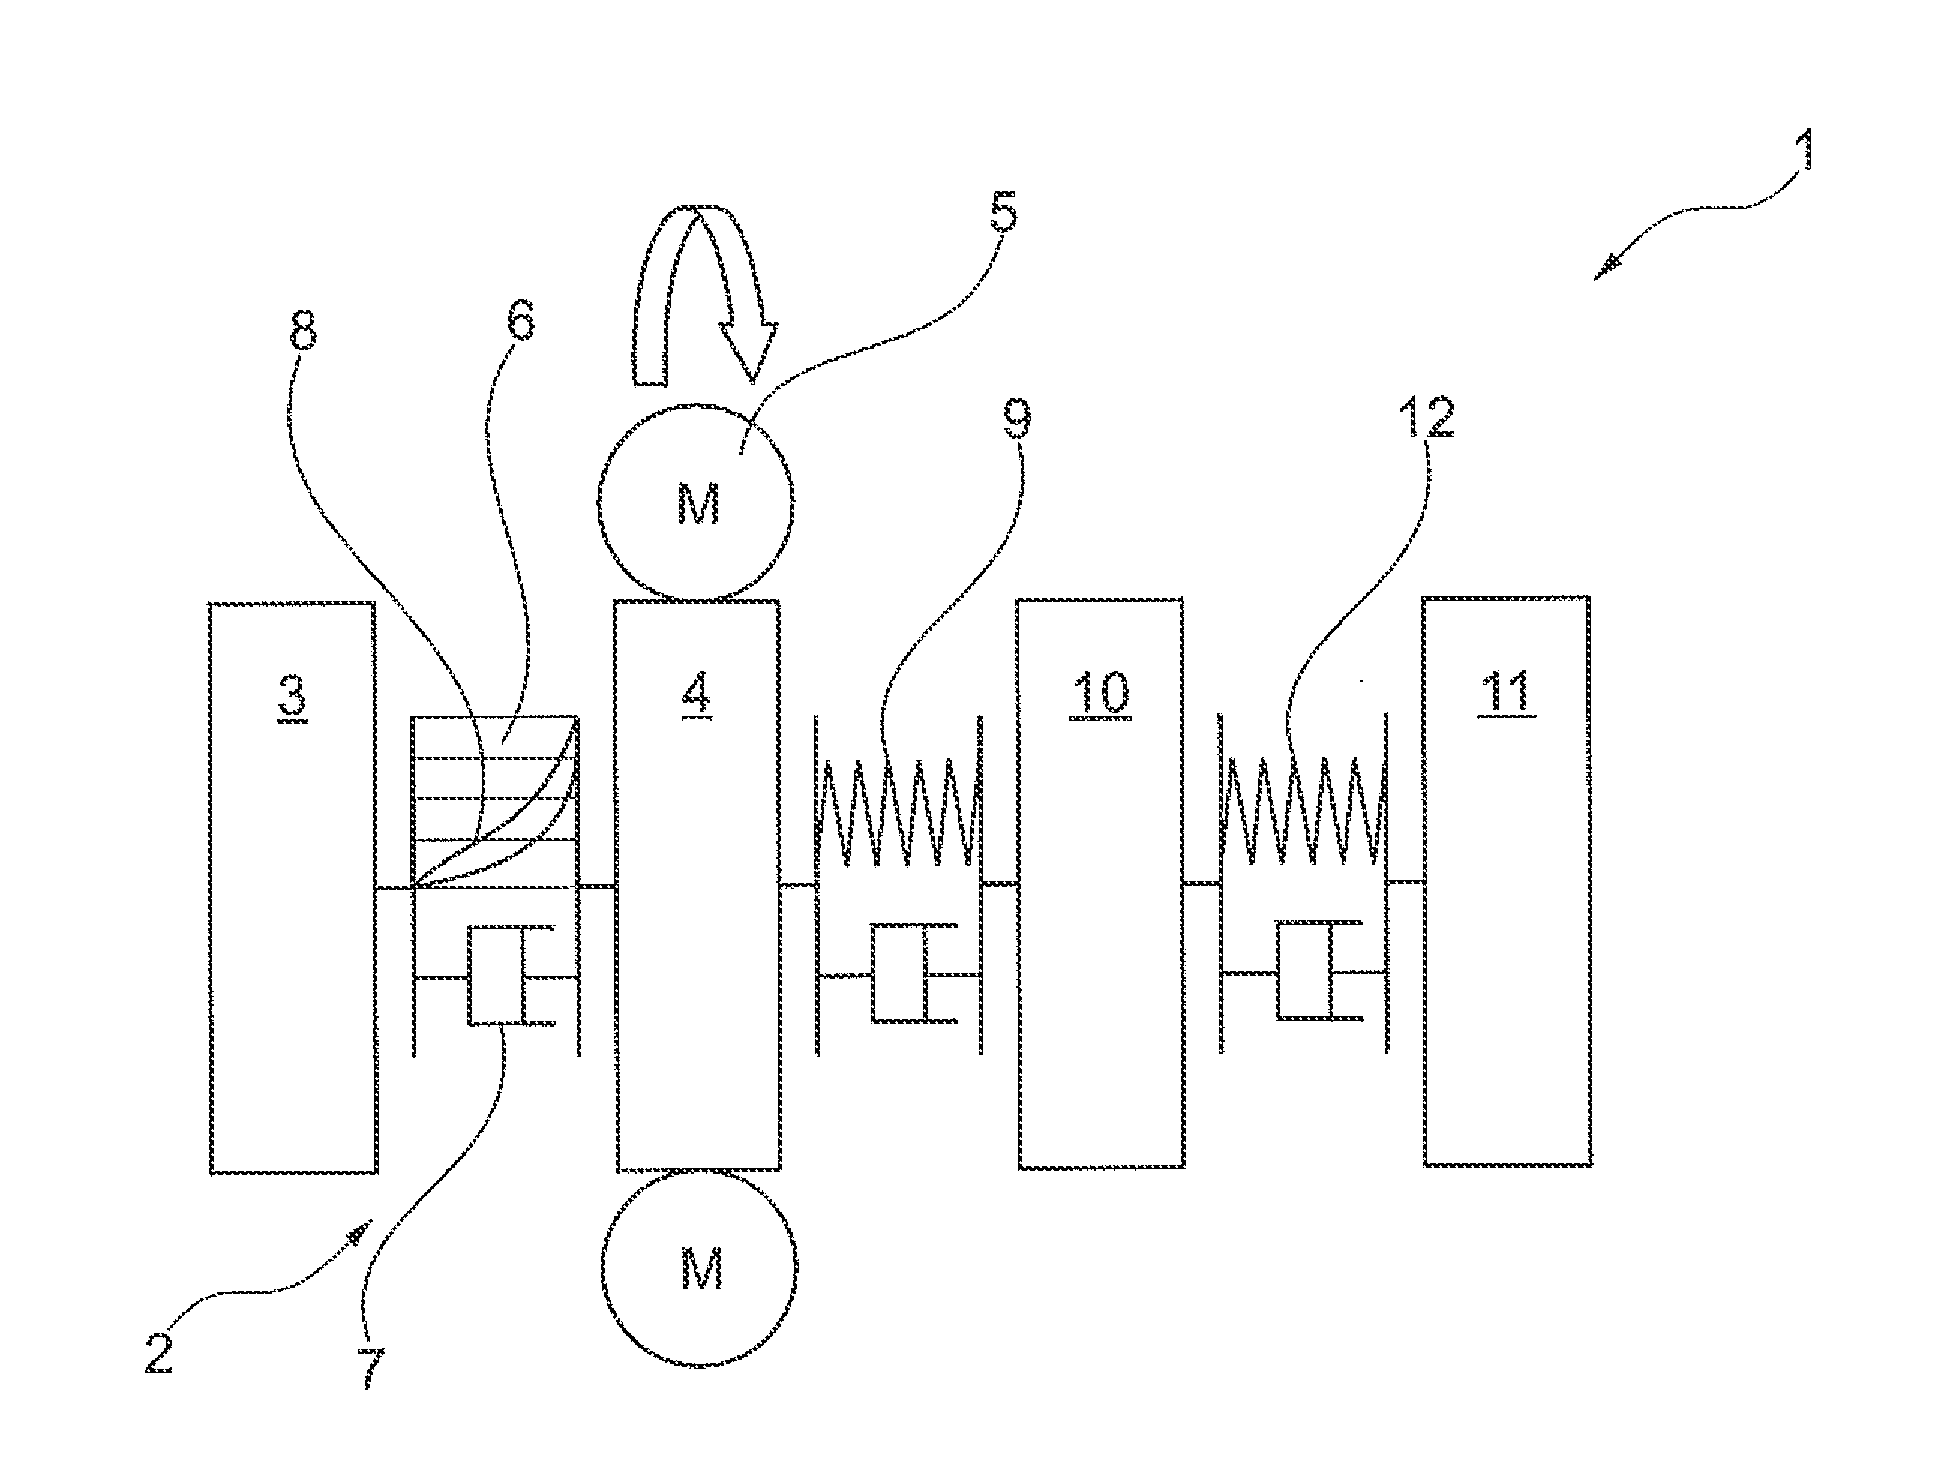 Hybrid drivetrain having active torsional vibration damping, and method for carrying out the active torsional damping